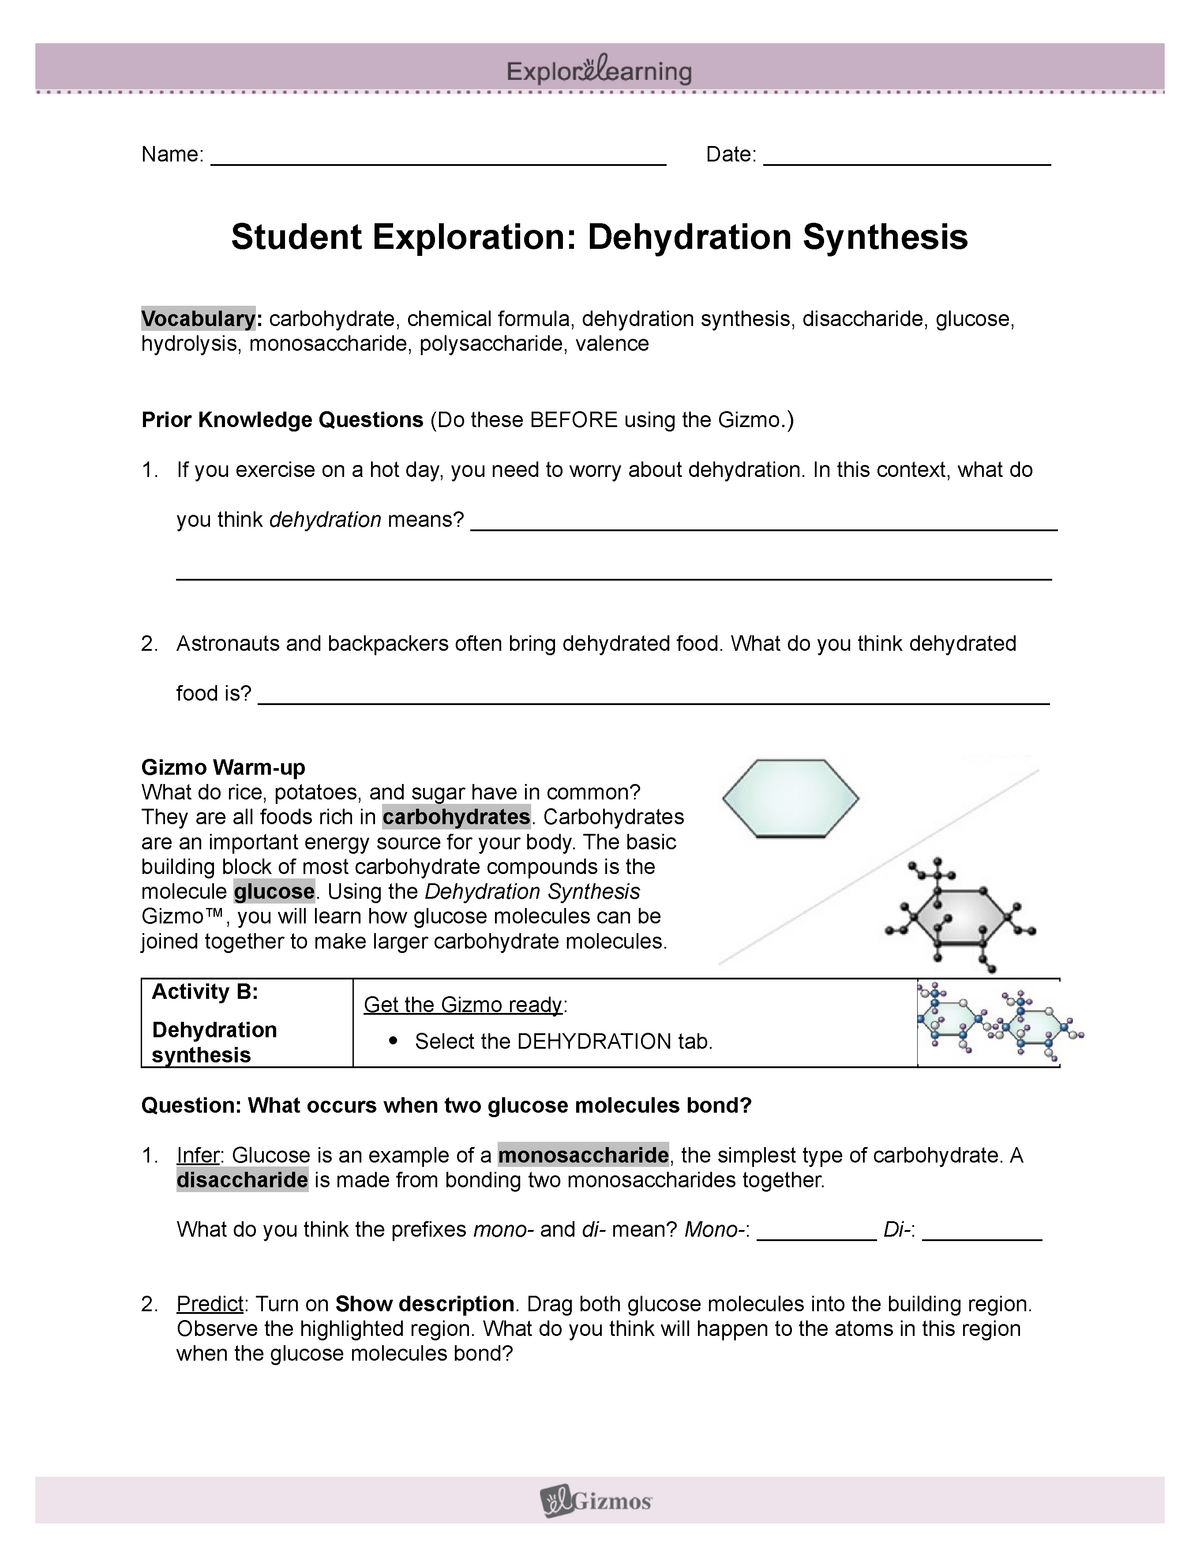 Dehydration synthesis assignment for biology Name